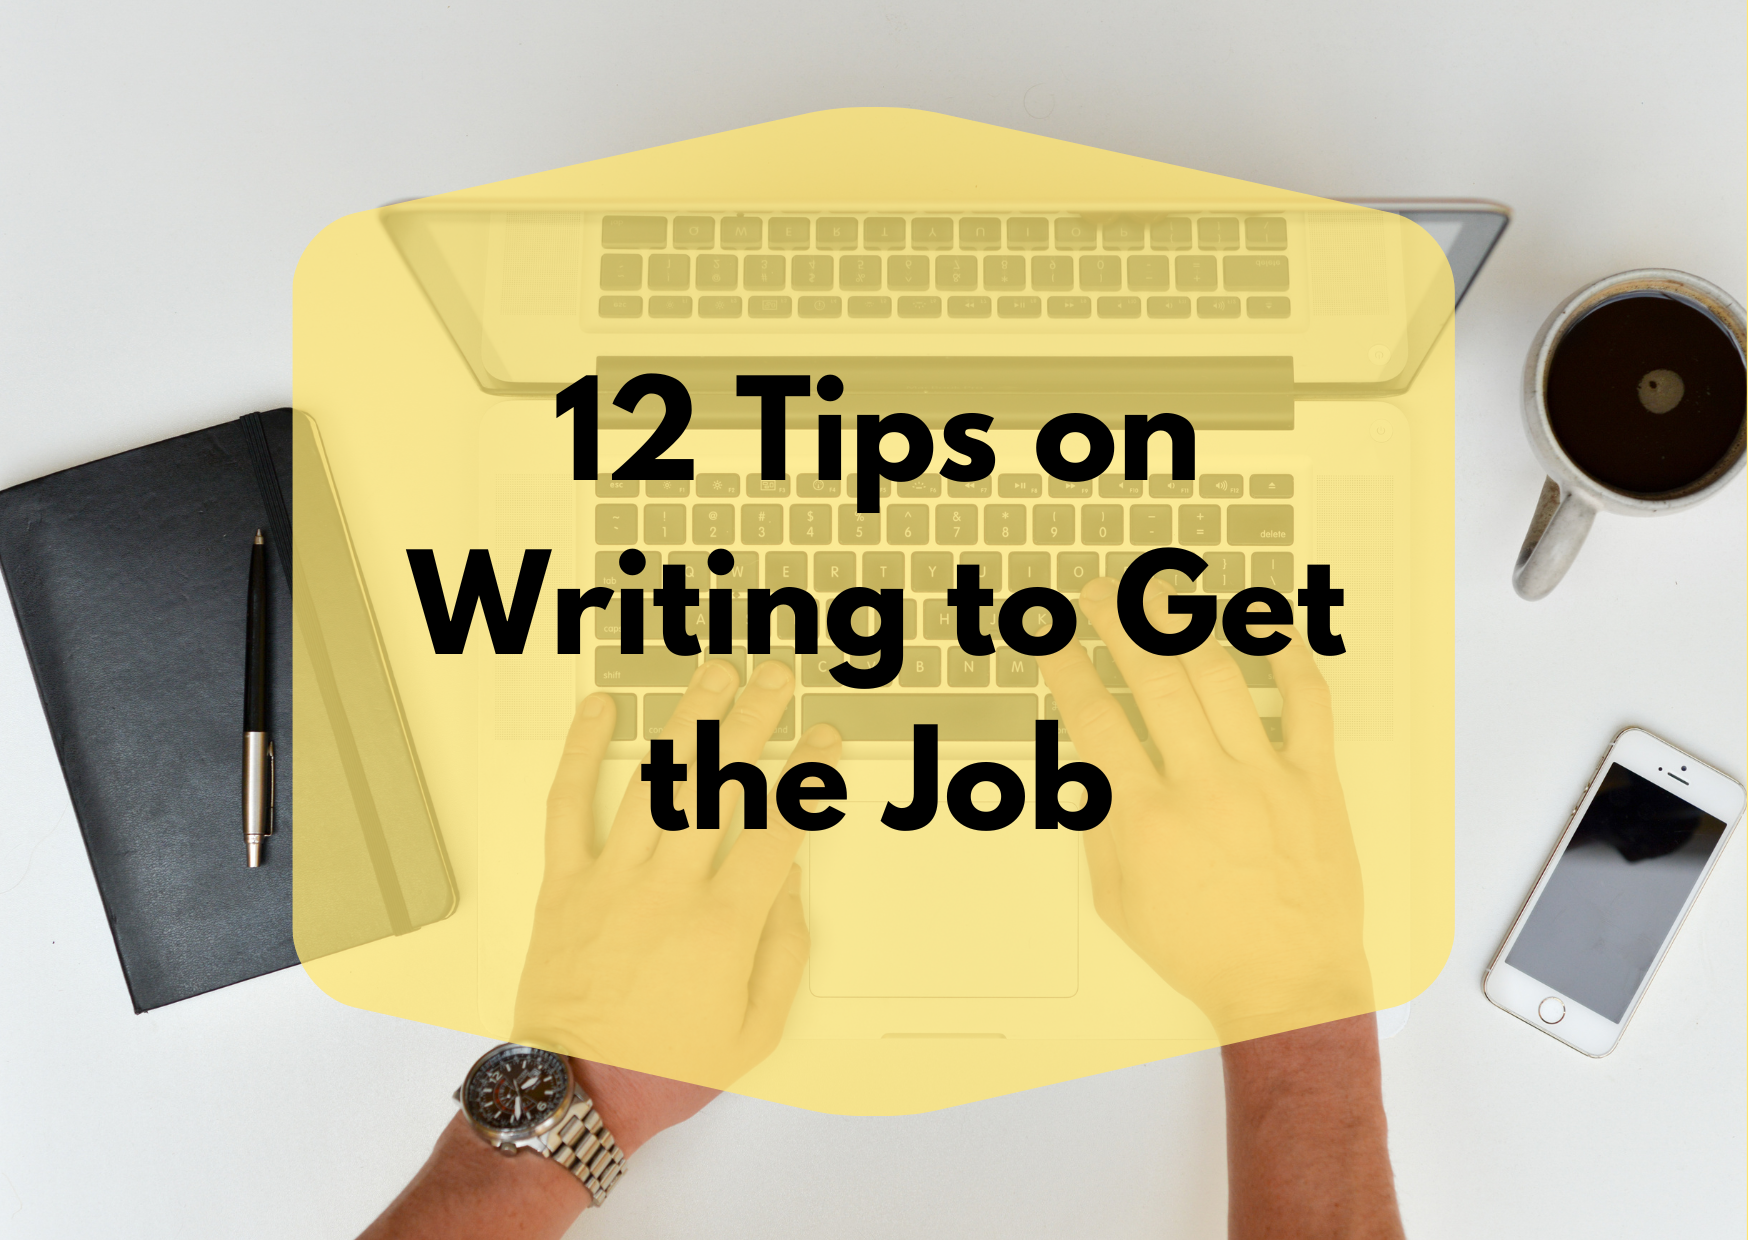 A picture of a man's hands hovering over a computer with the caption "12 Tips on Writing to Get the Job"